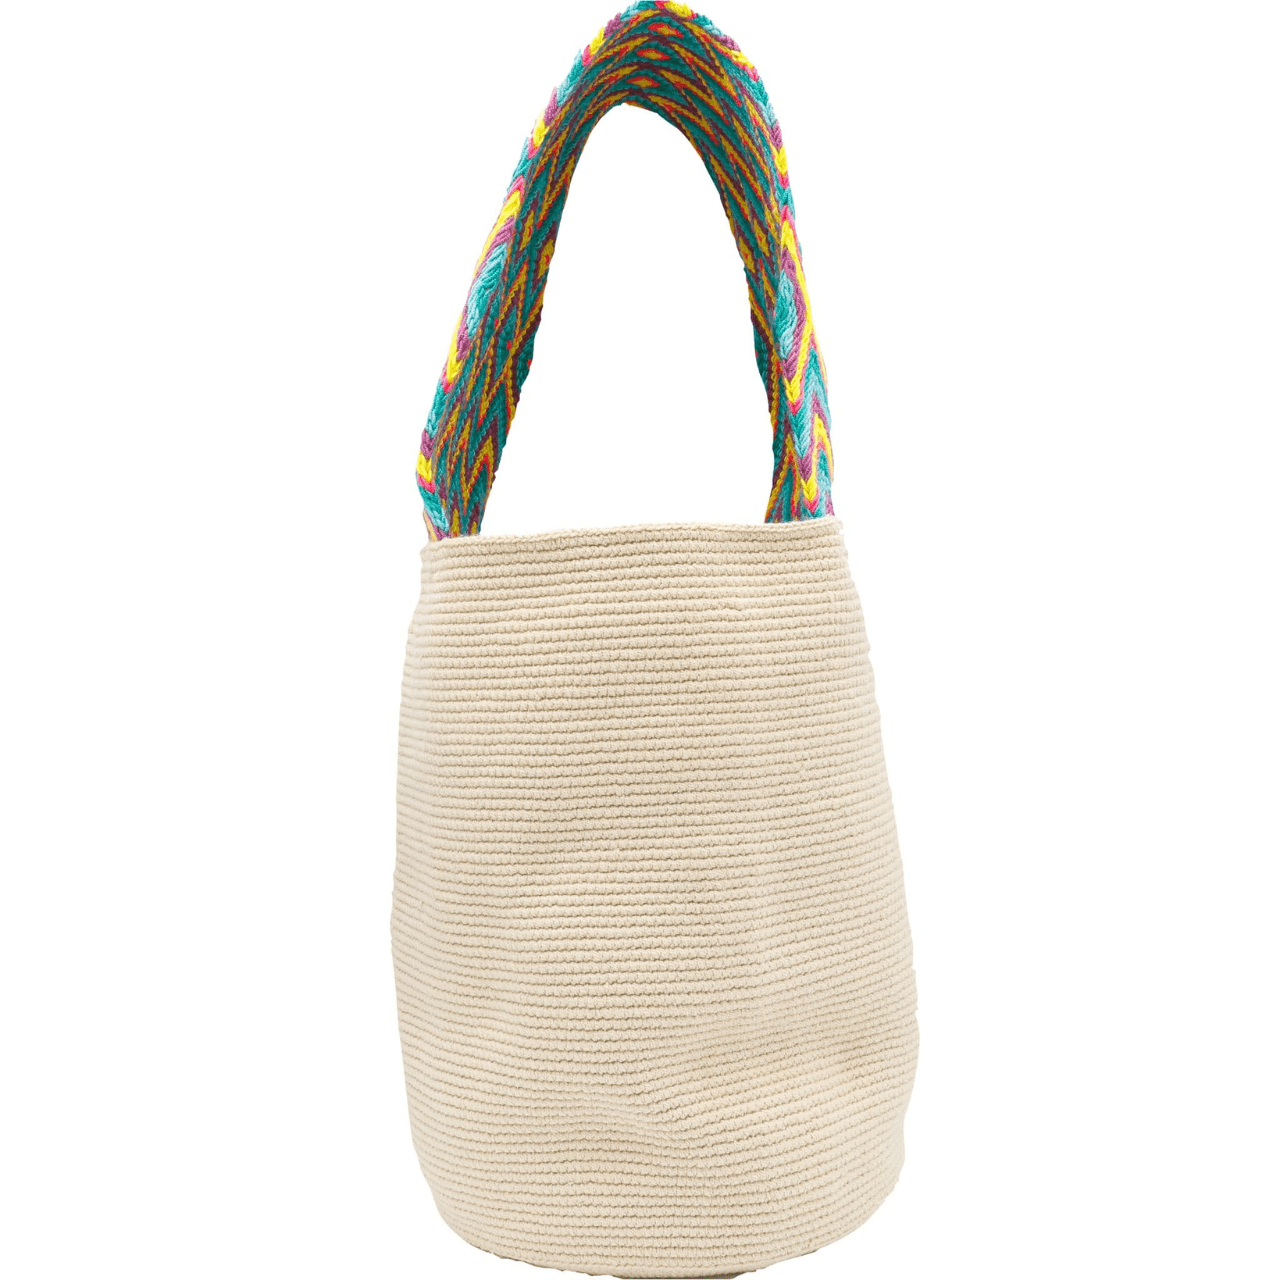 Feray Bucket Bag - Solid Beige with Short Wide Handle in Vibrant Colors. Wear as Shoulder Strap or Purse.